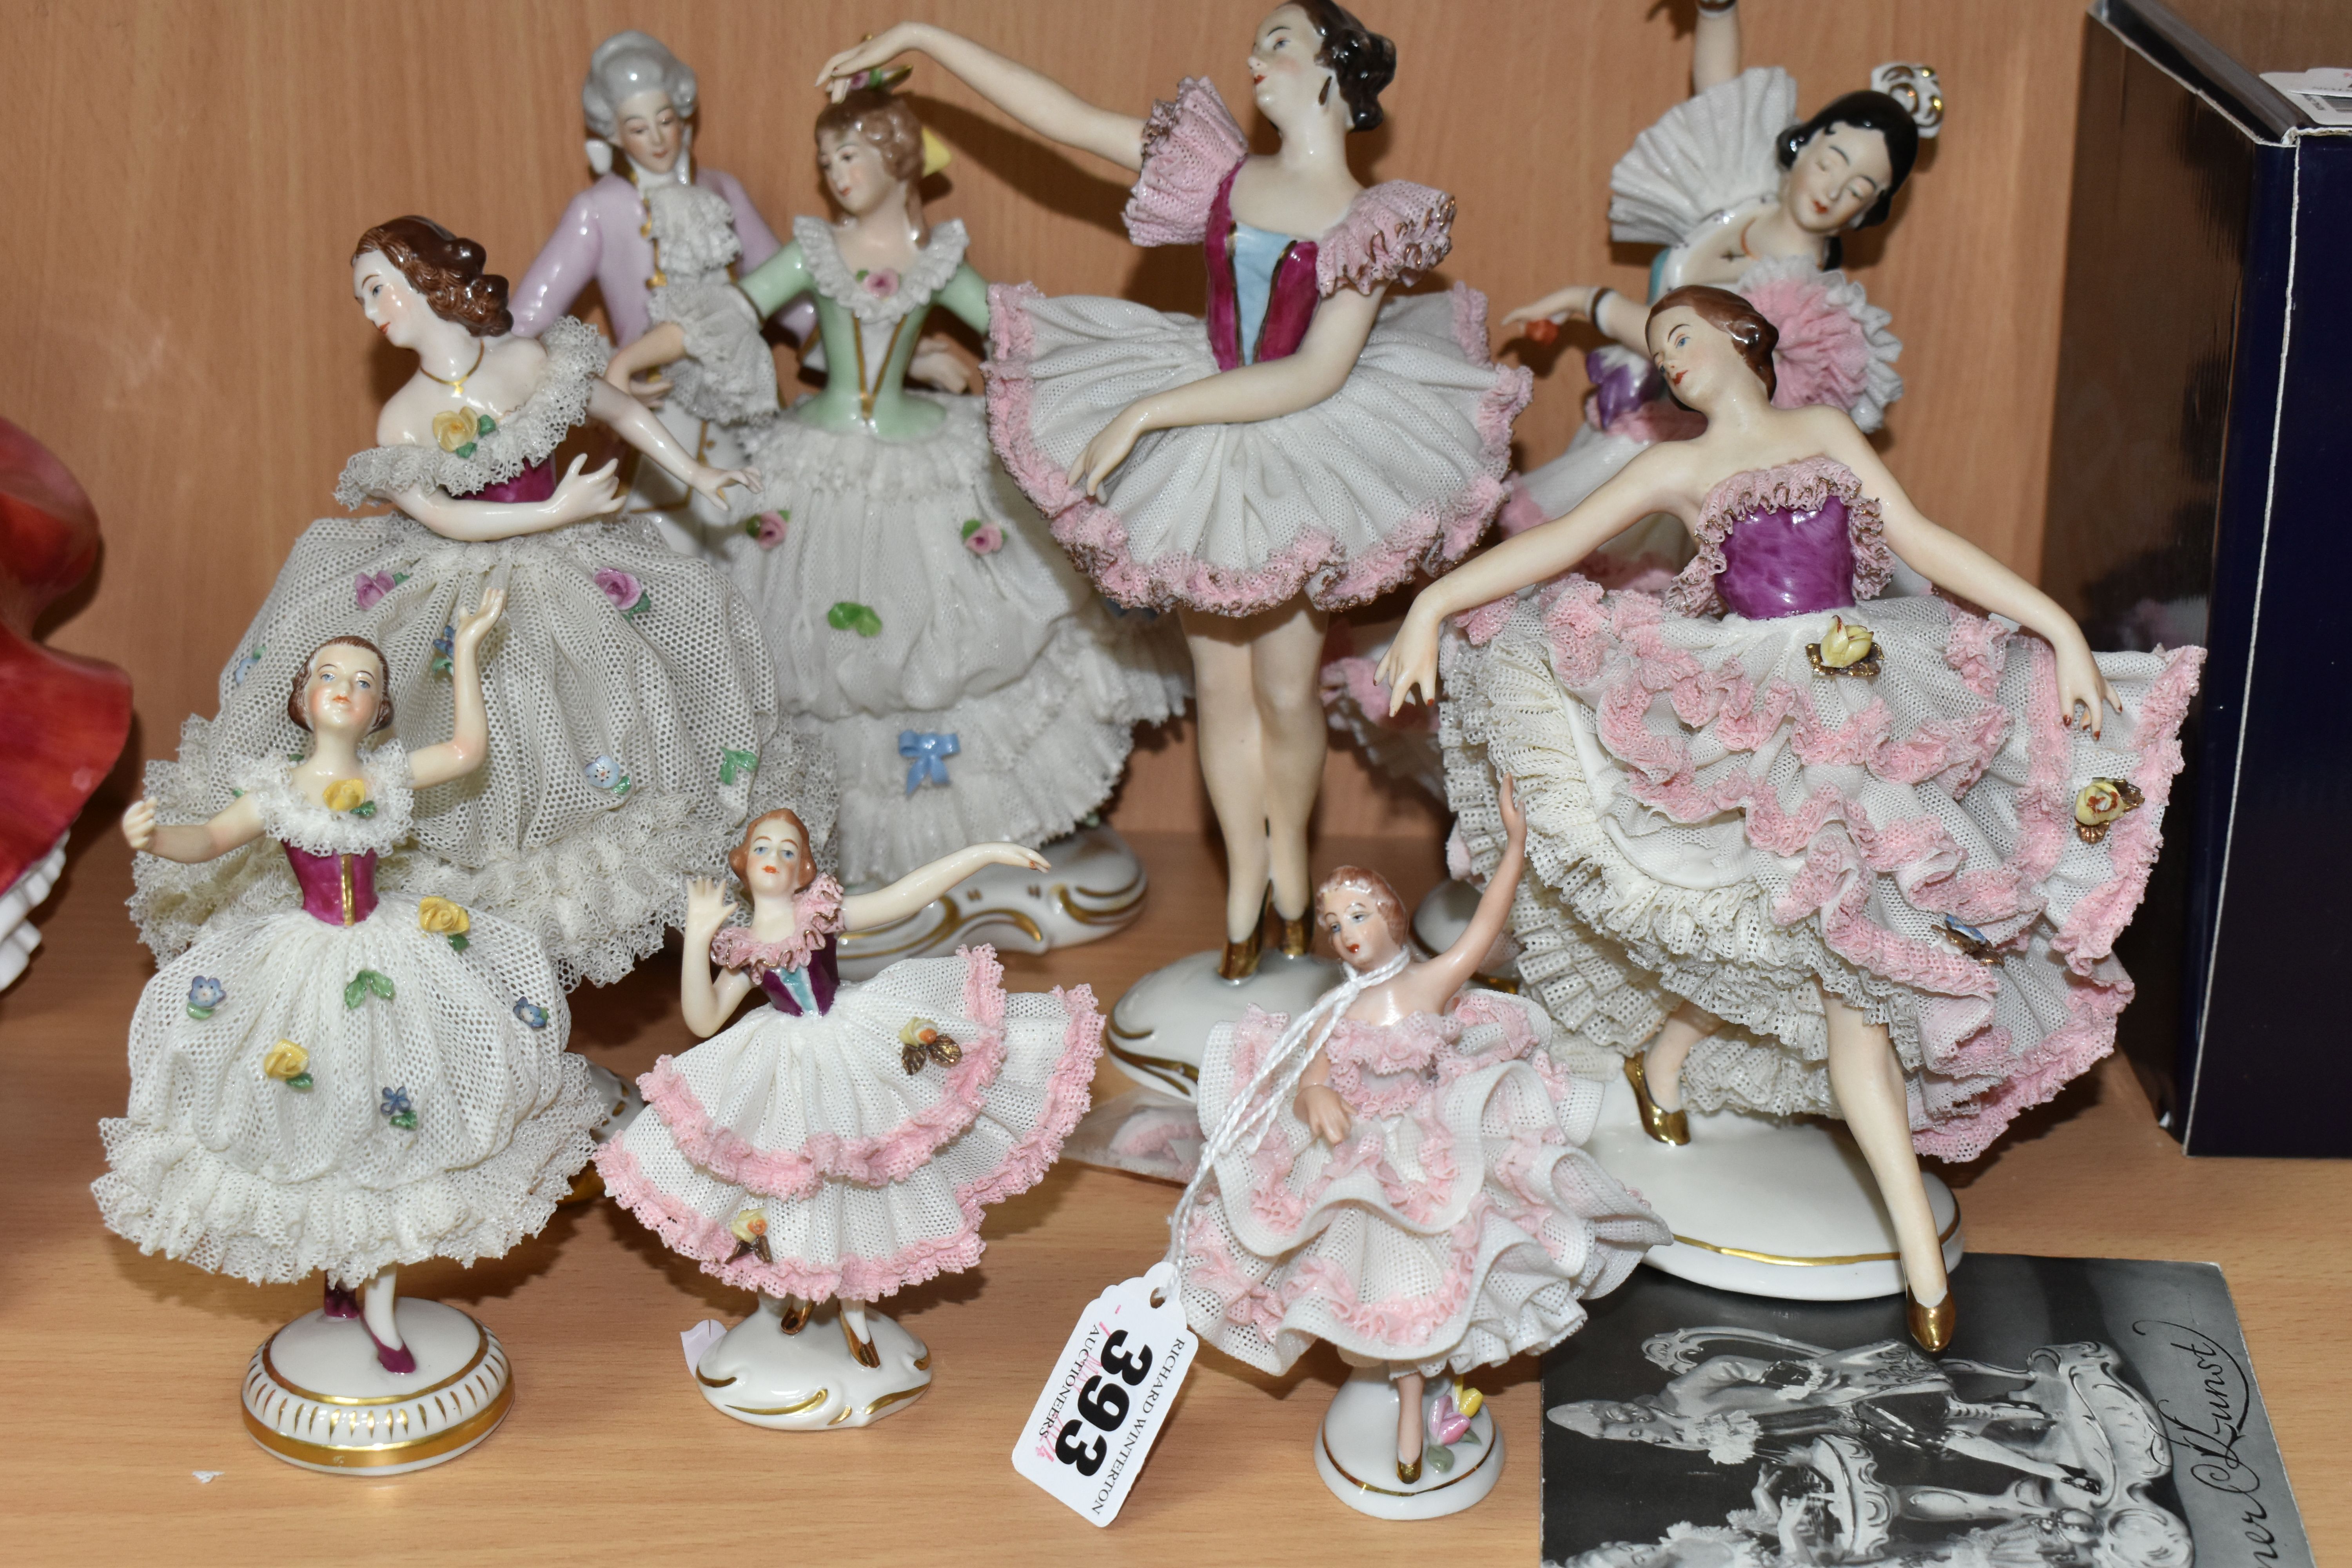 EIGHT DRESDEN FIGURES, with lace skirts, to include a figure group, flamenco, ballet and other